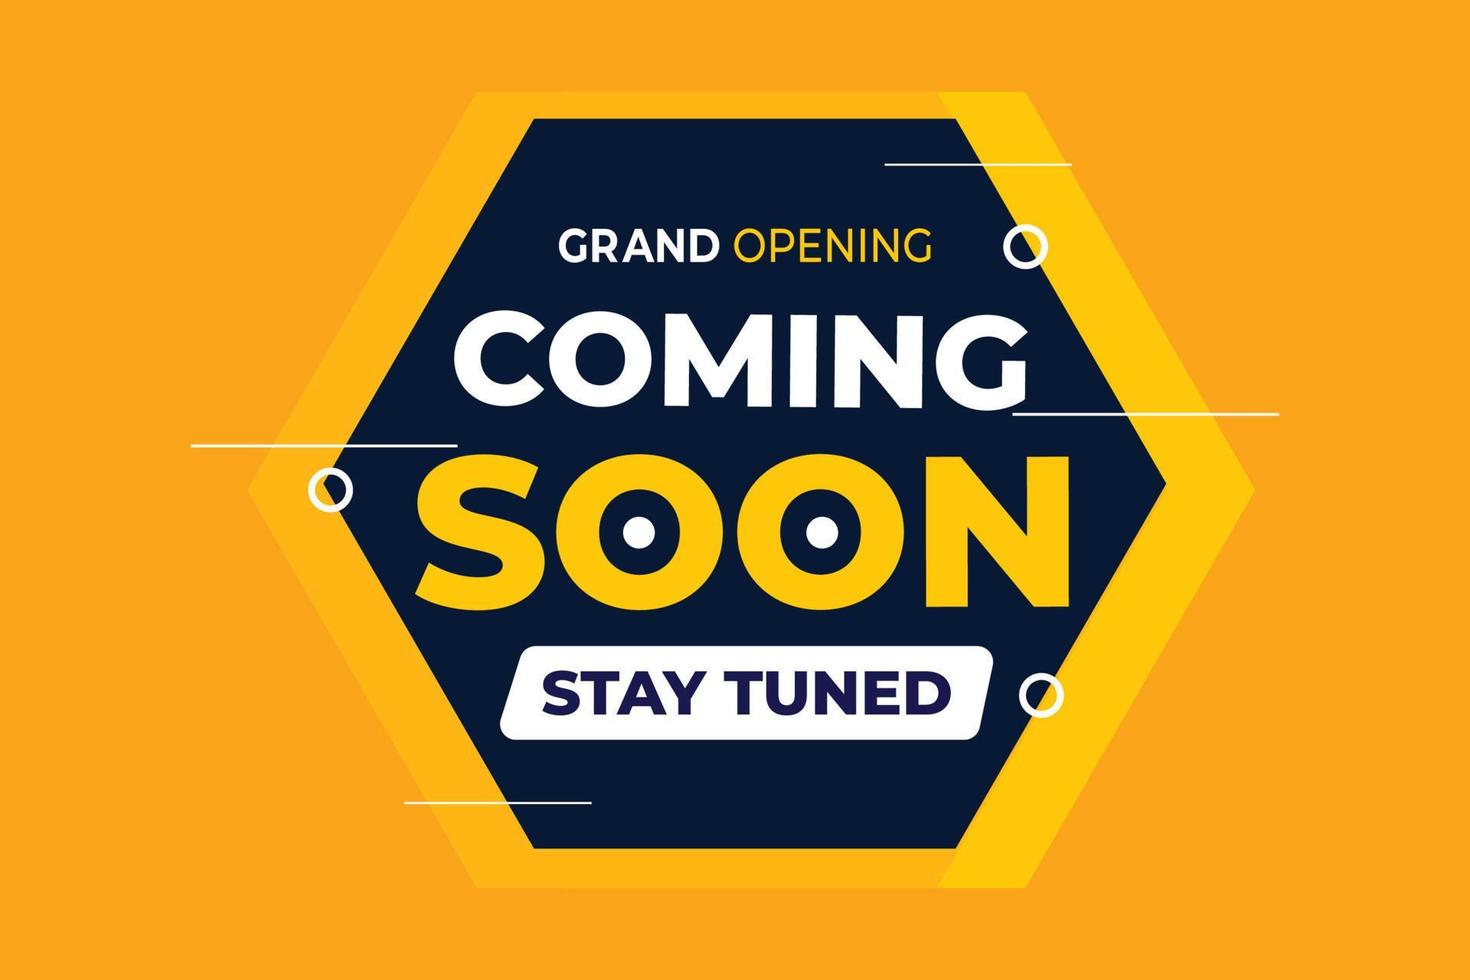 Coming soon grand opening stay tuned with yellow background design vector